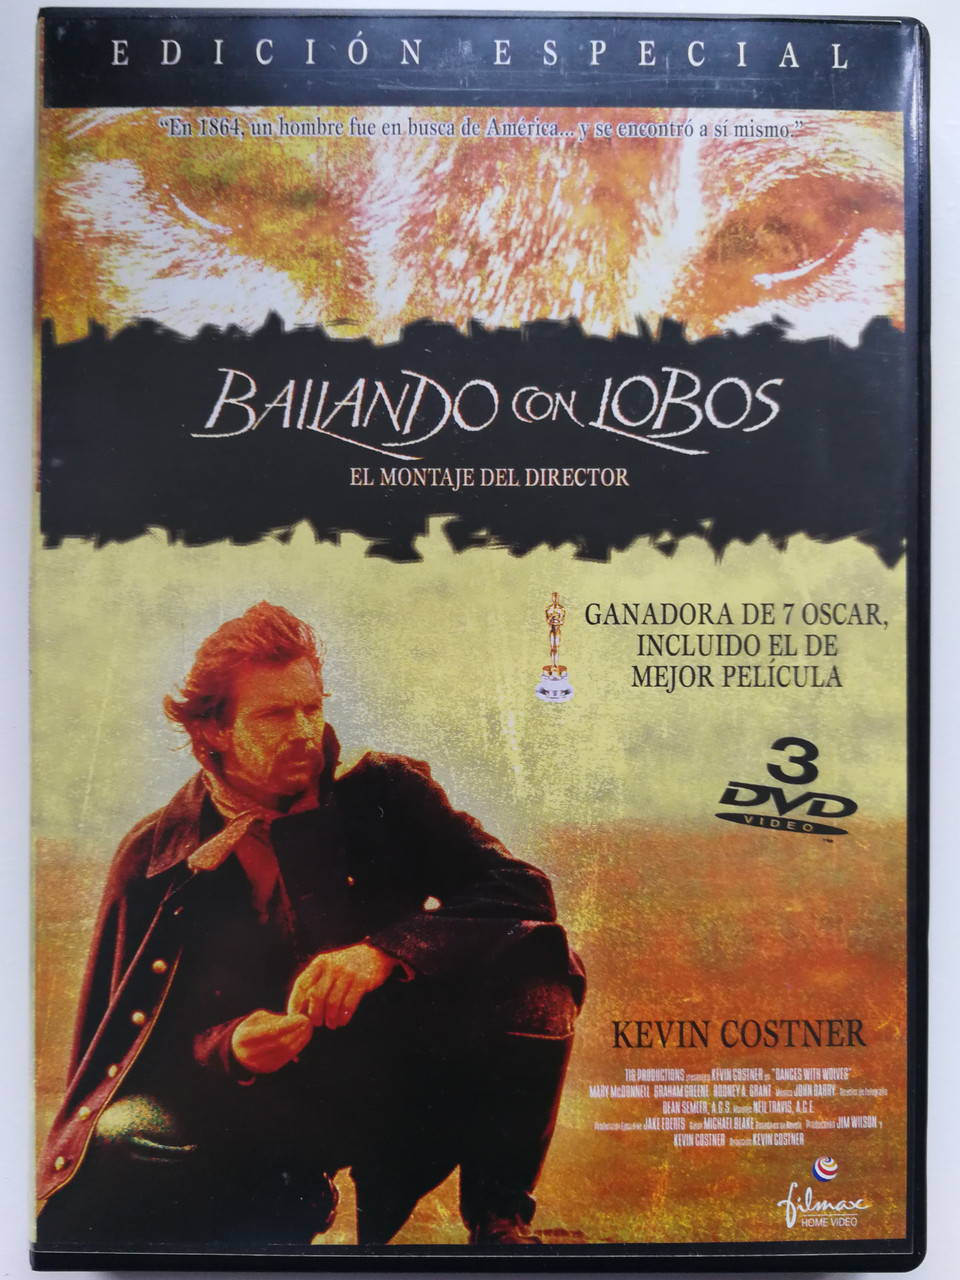 Dances with Wolves 3DVD 1990 Bailando con Lobos / Spanish release  Director's cut / Directed by Kevin Costner / Starring: Kevin Costner, Mary  McDonnell, Graham Greene, Rodney Grant - bibleinmylanguage